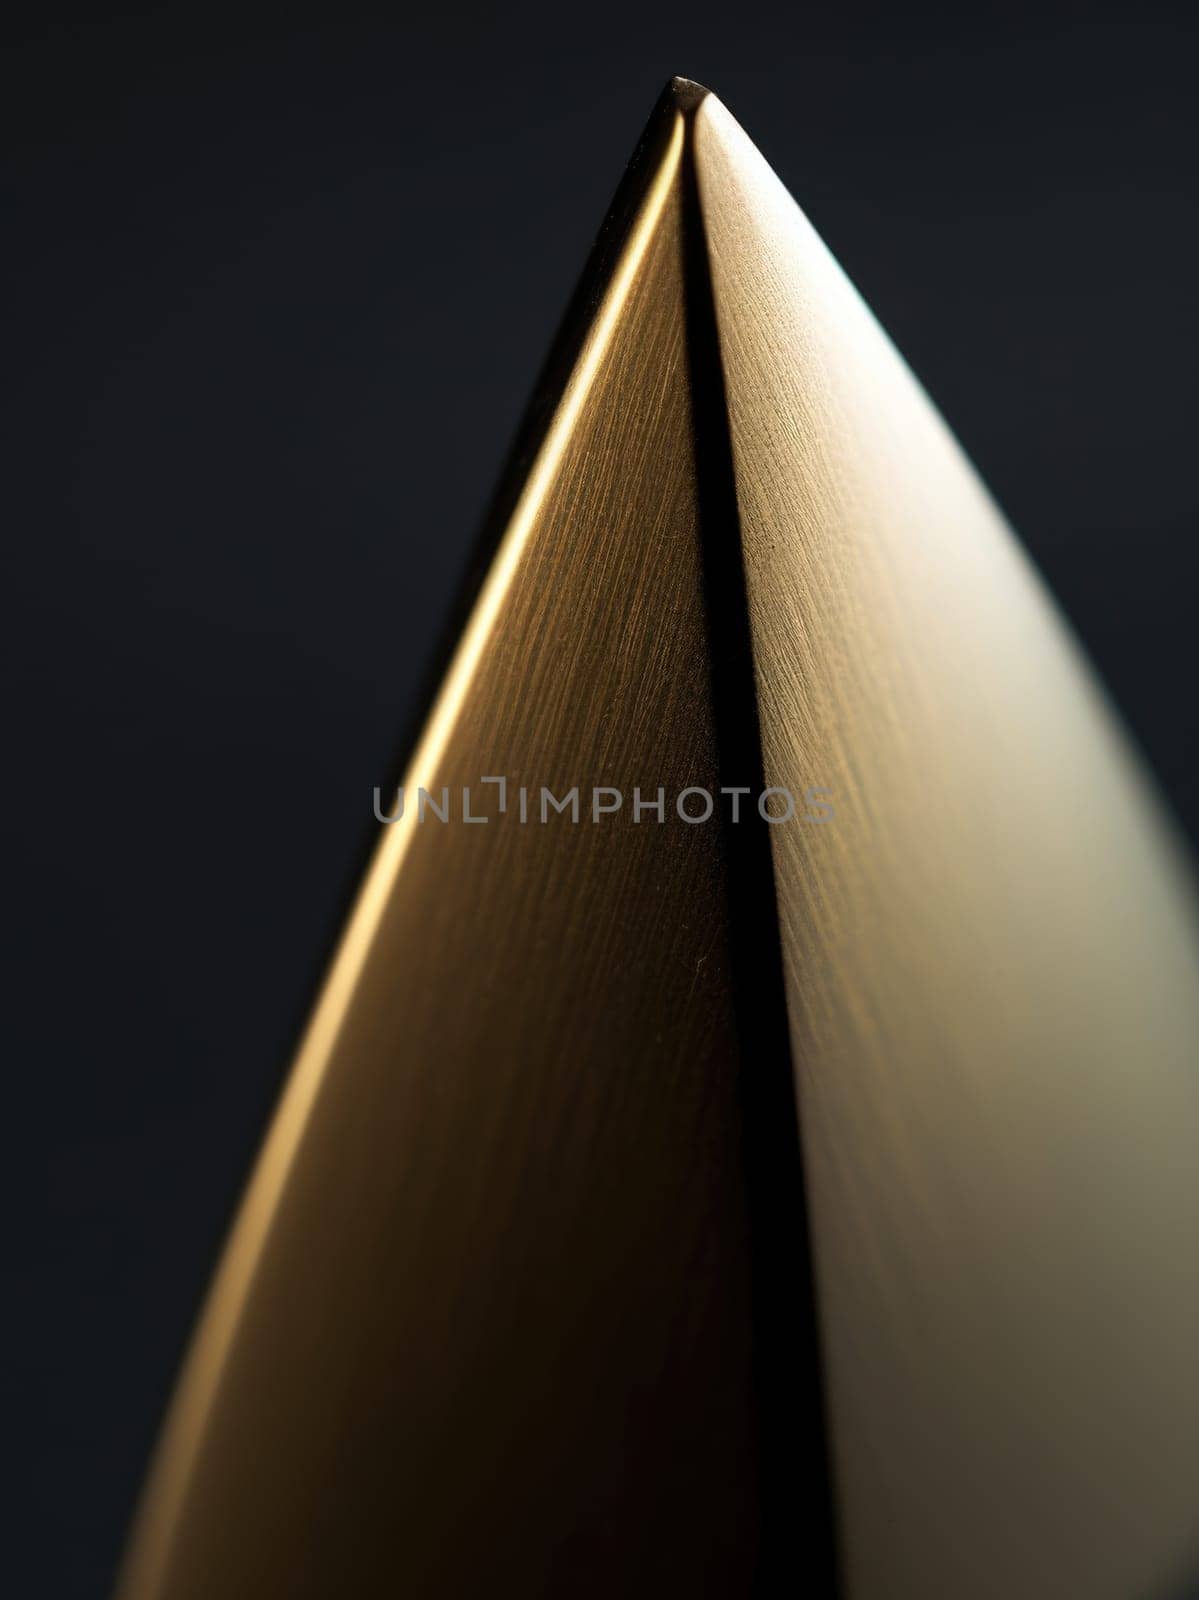 A golden triangle with a black background, AI by starush